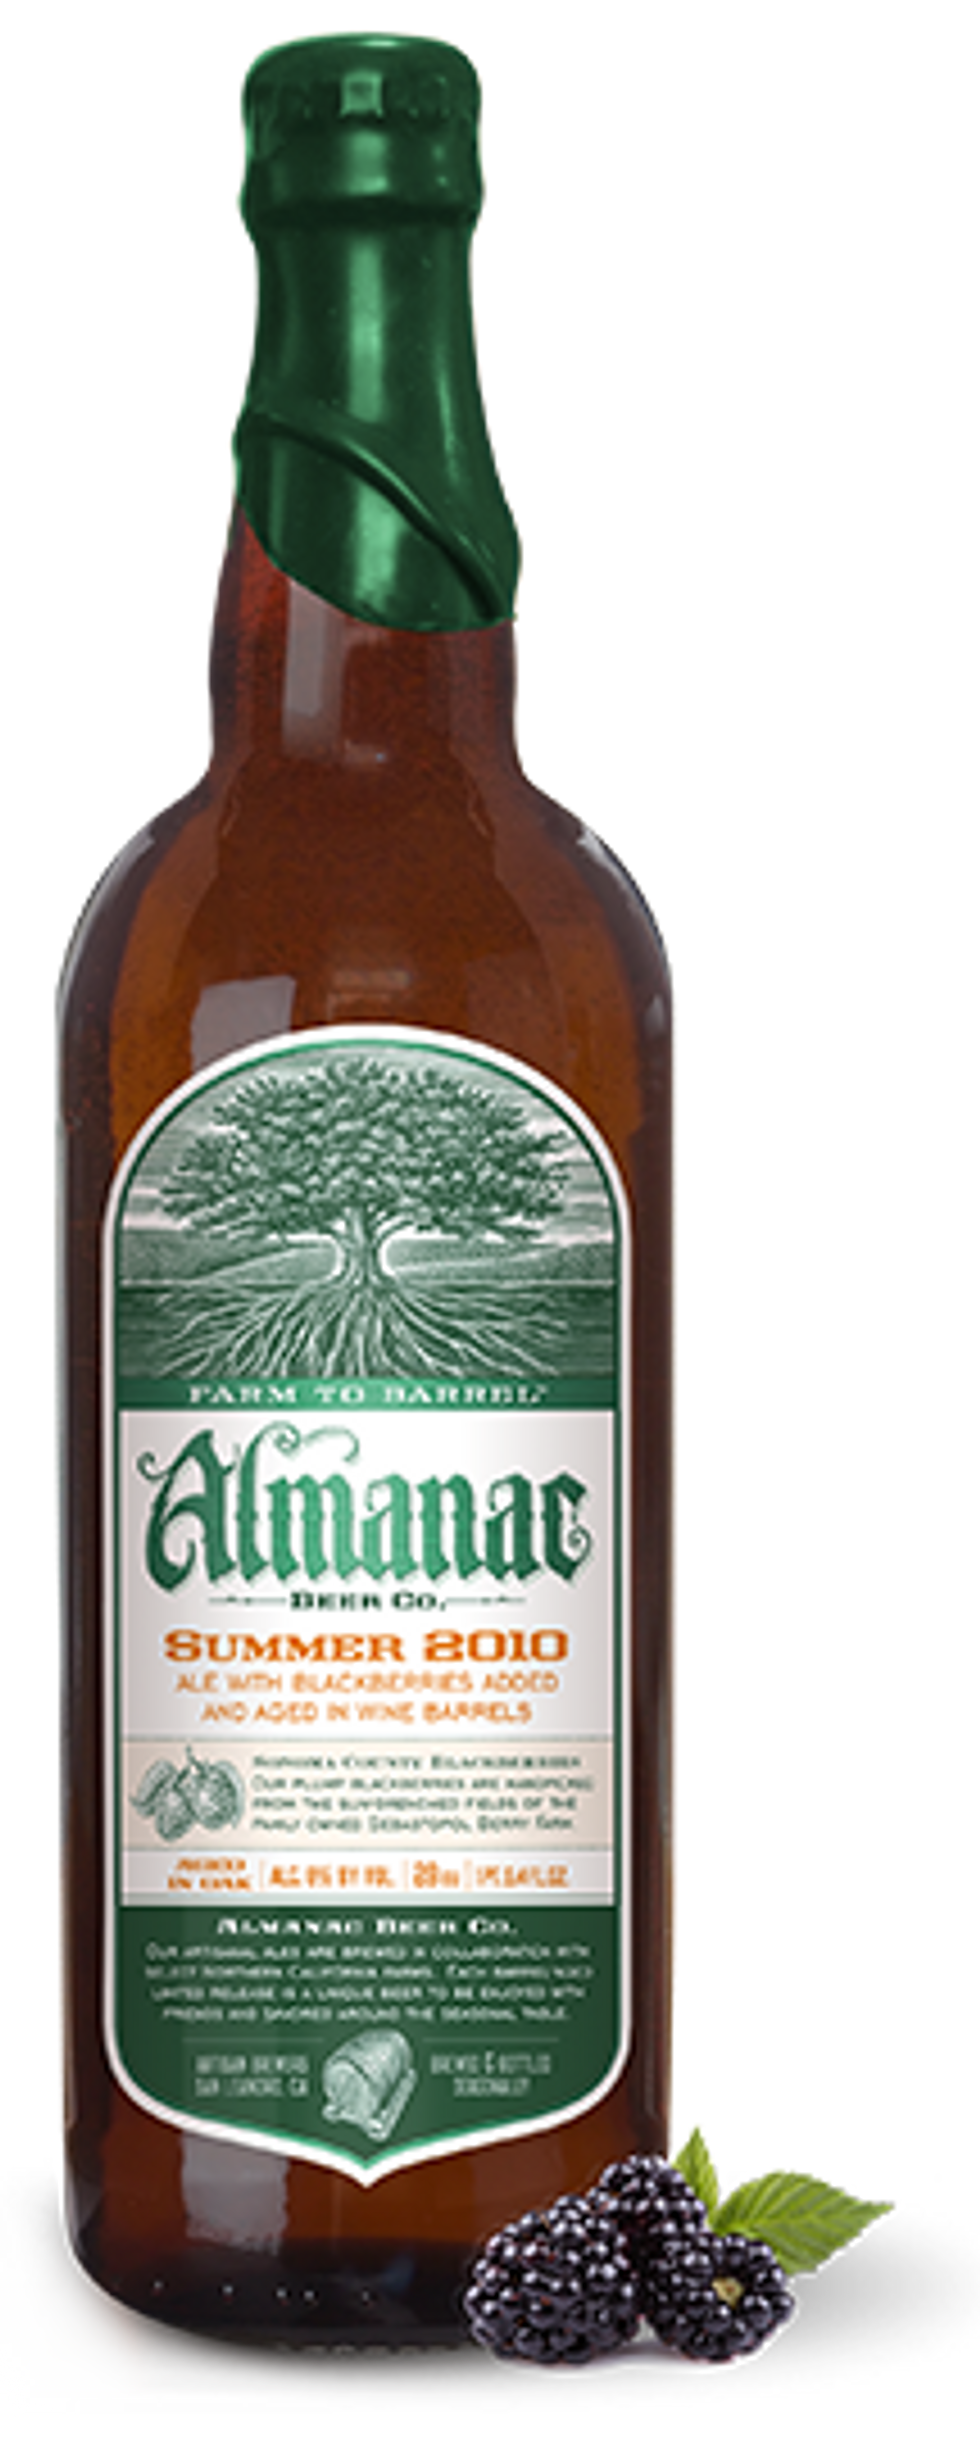 Almanac Beer Company's Summer 2010 Blackberry Ale: Out at City Beer Store June 30th